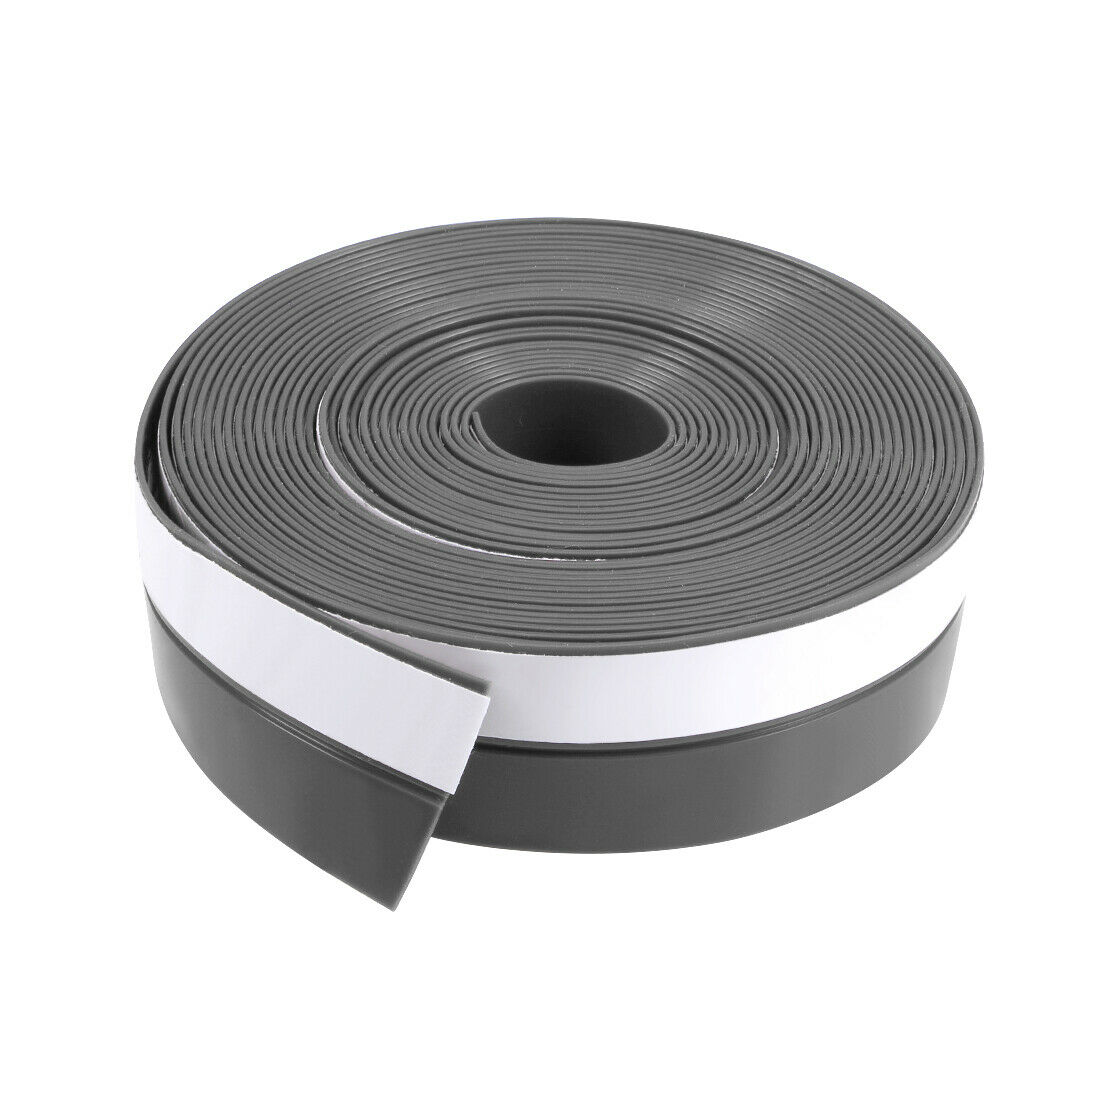 25mm Width 5m Long Self Adhesive Weather Stripping Frameless Door Seal (gray)